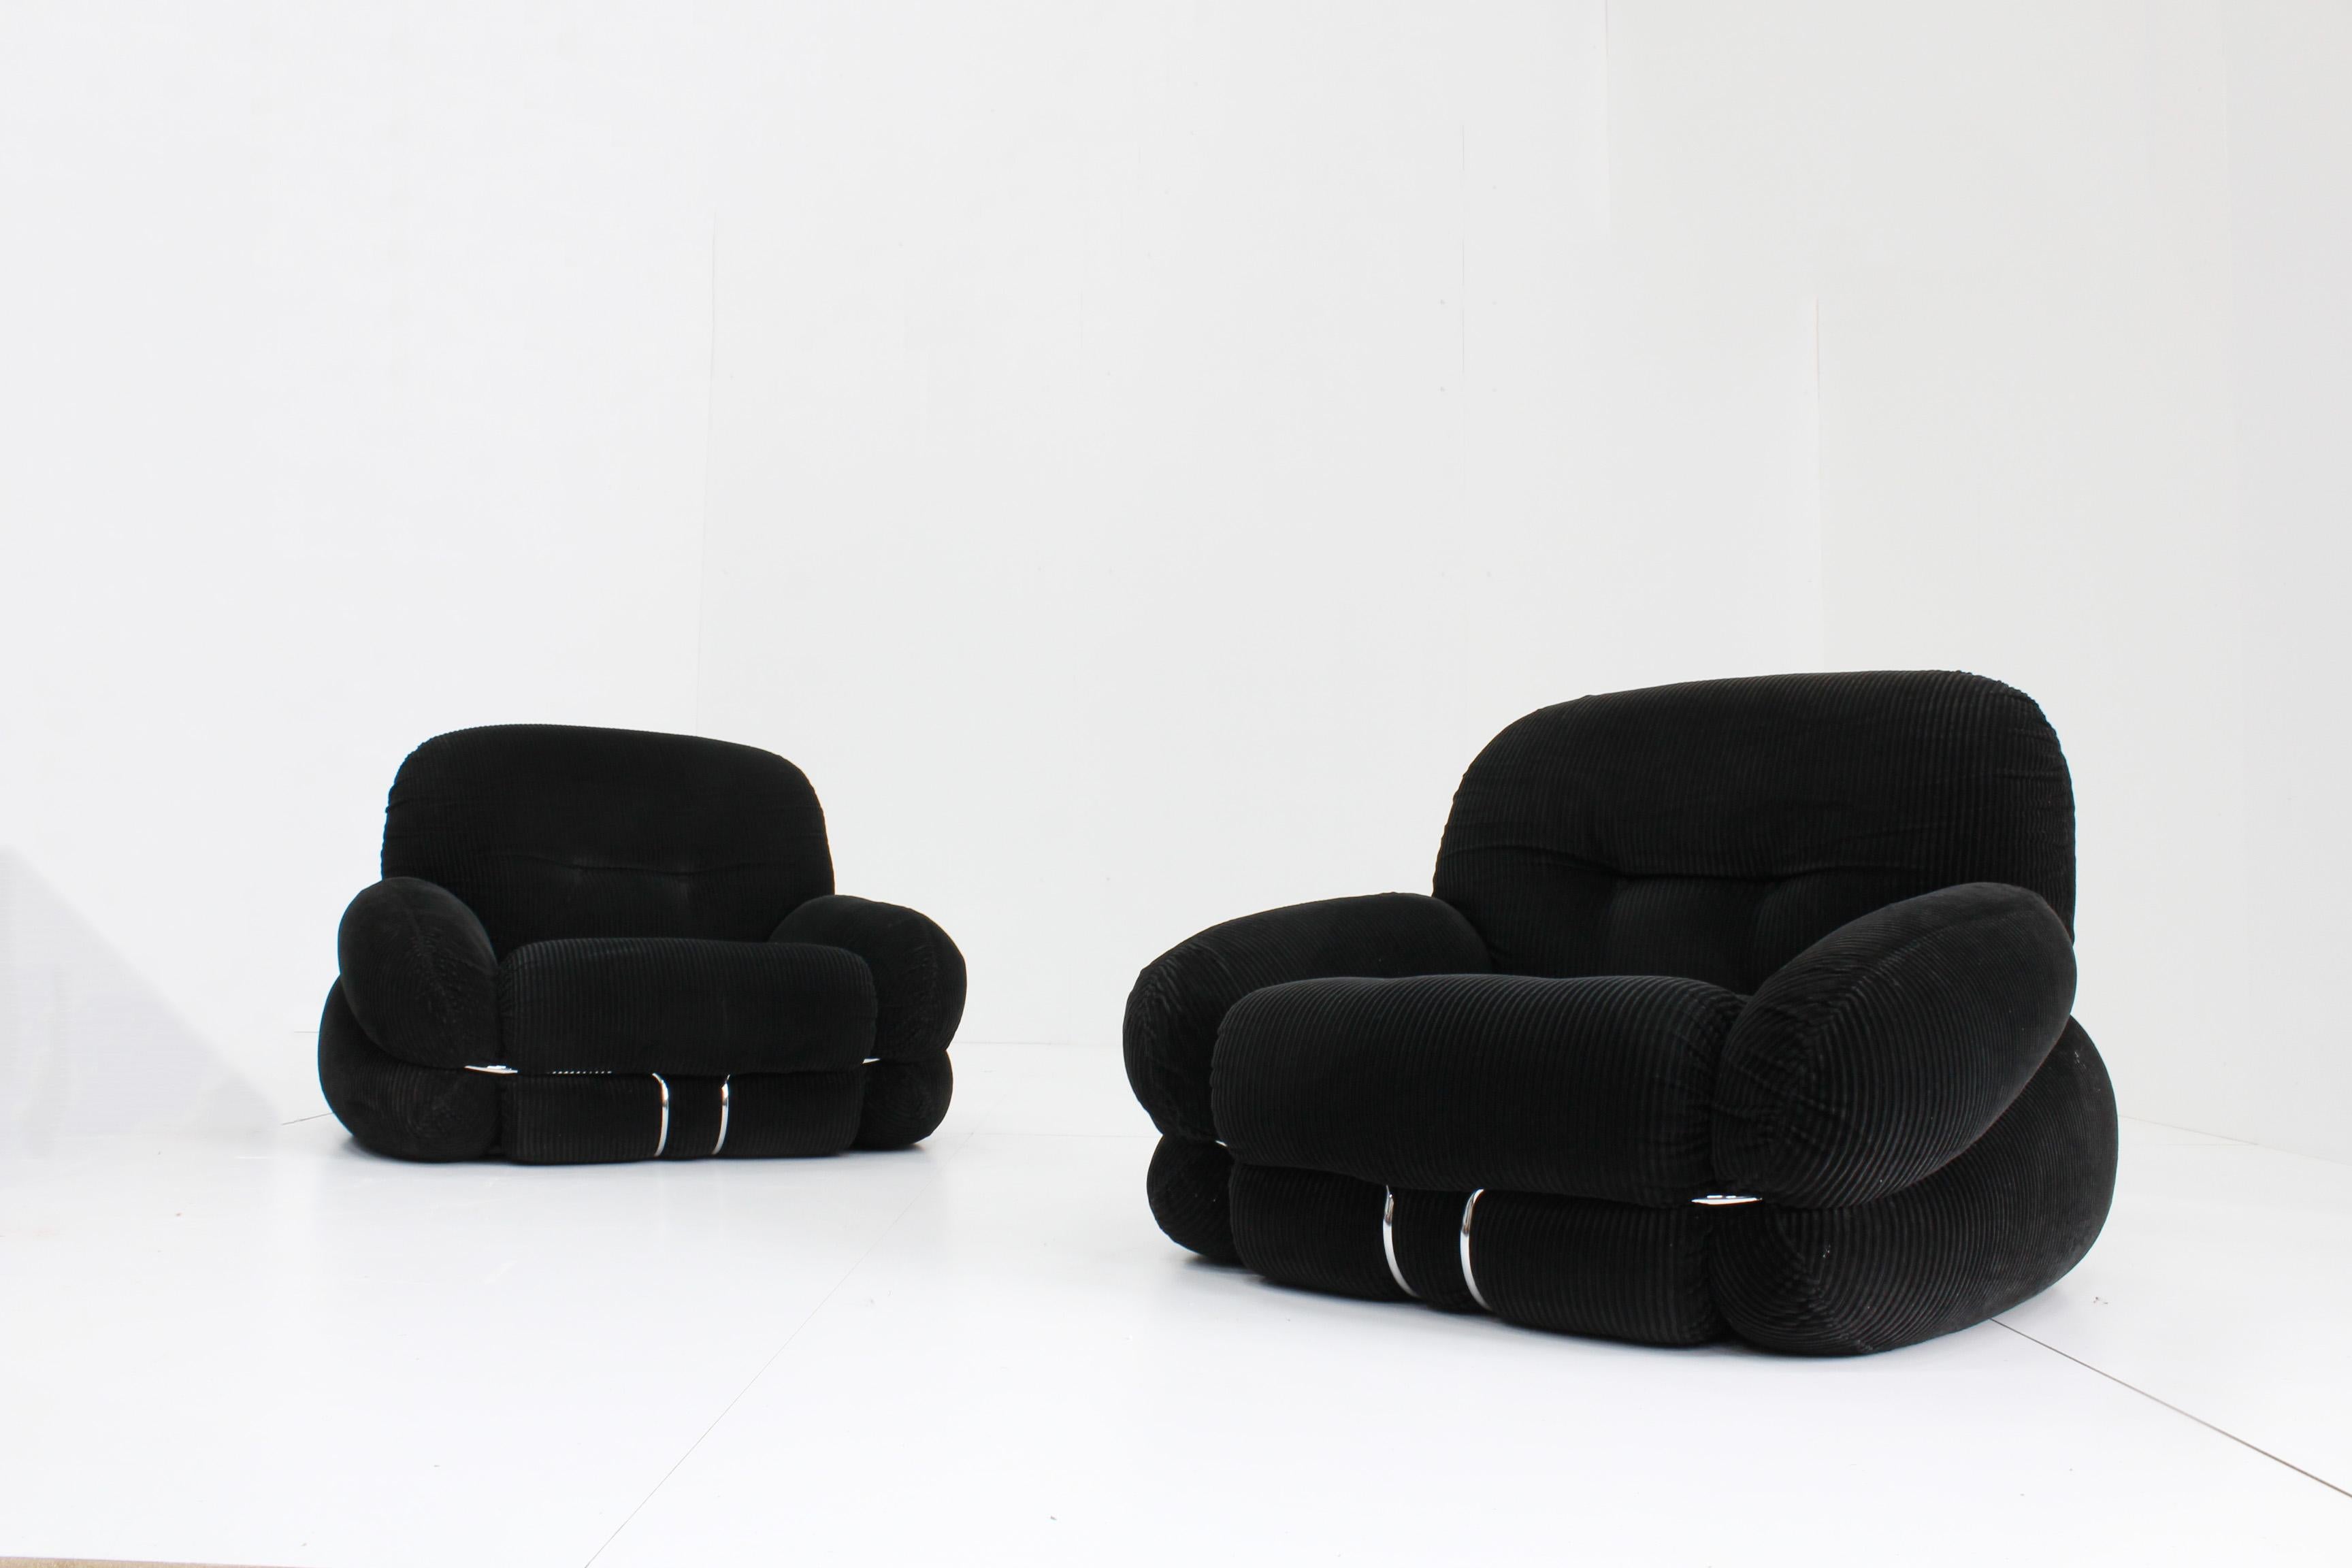 Set of Okay armchairs designed by Italian designer Adriano Piazzesi in the 1970s. These comfy set of chairs are in a very good condition with minor traces of use. This edition is in a black rib fabric with a chromed metal structure.

Price is for